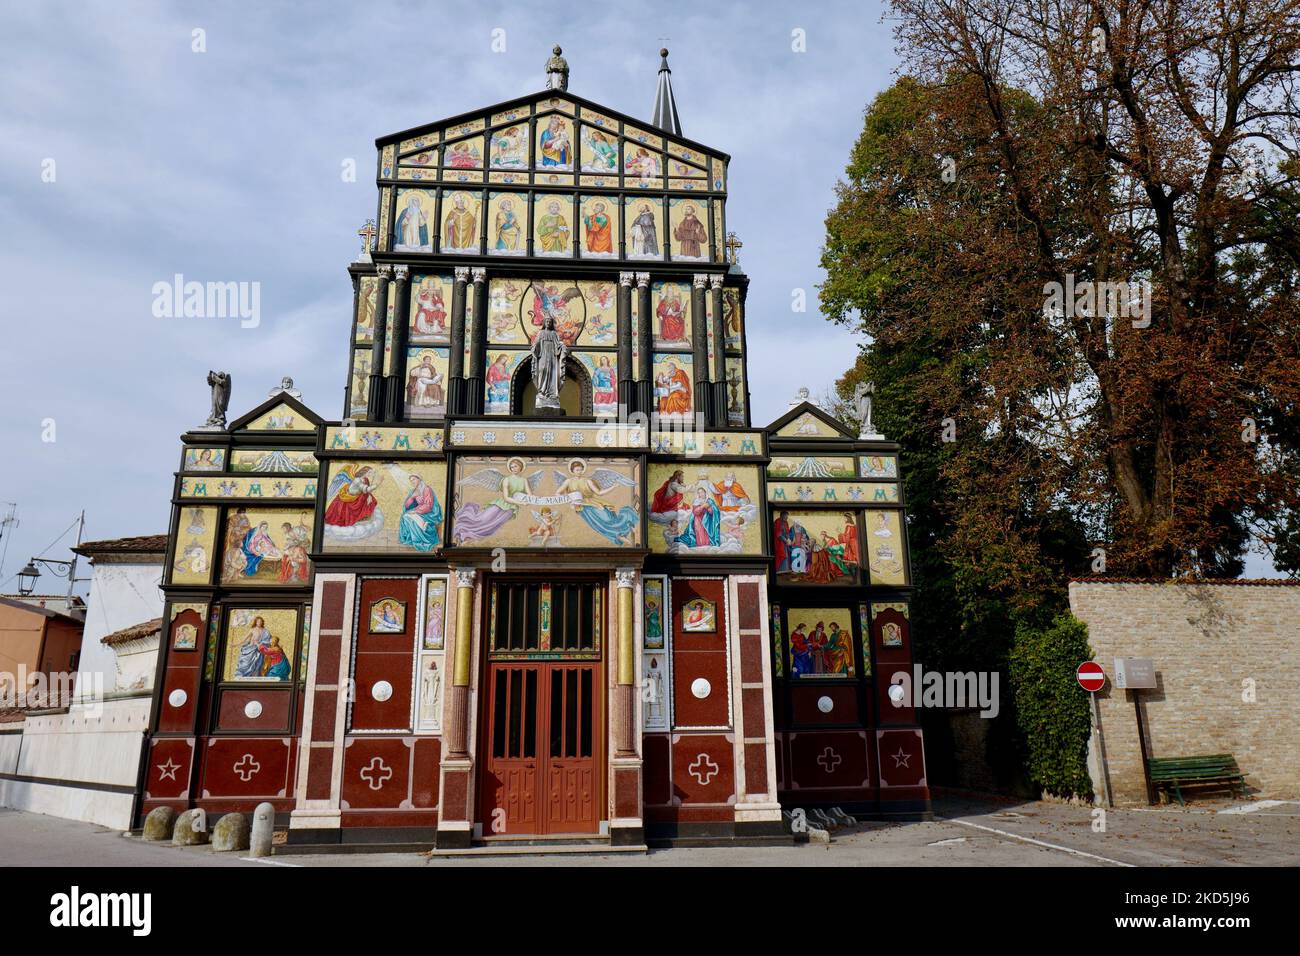 The colorful Saint Peter Church in the small village of Pizzighettone Italy Stock Photo